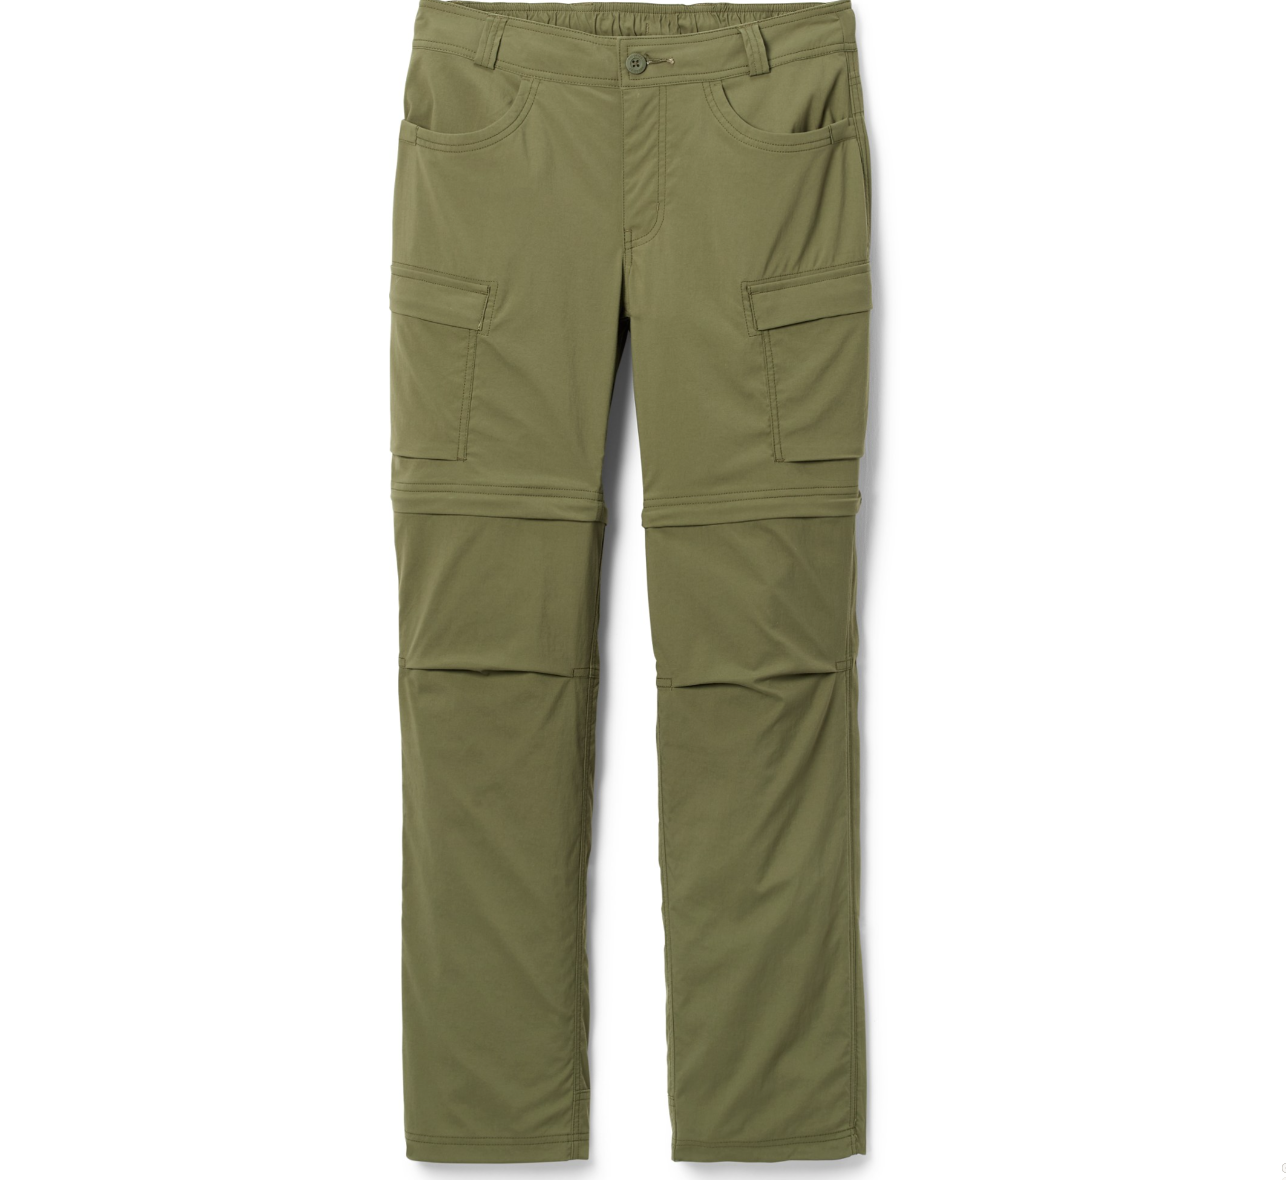 REI Sahara Hiking Pants Check Out This Review For All The Details